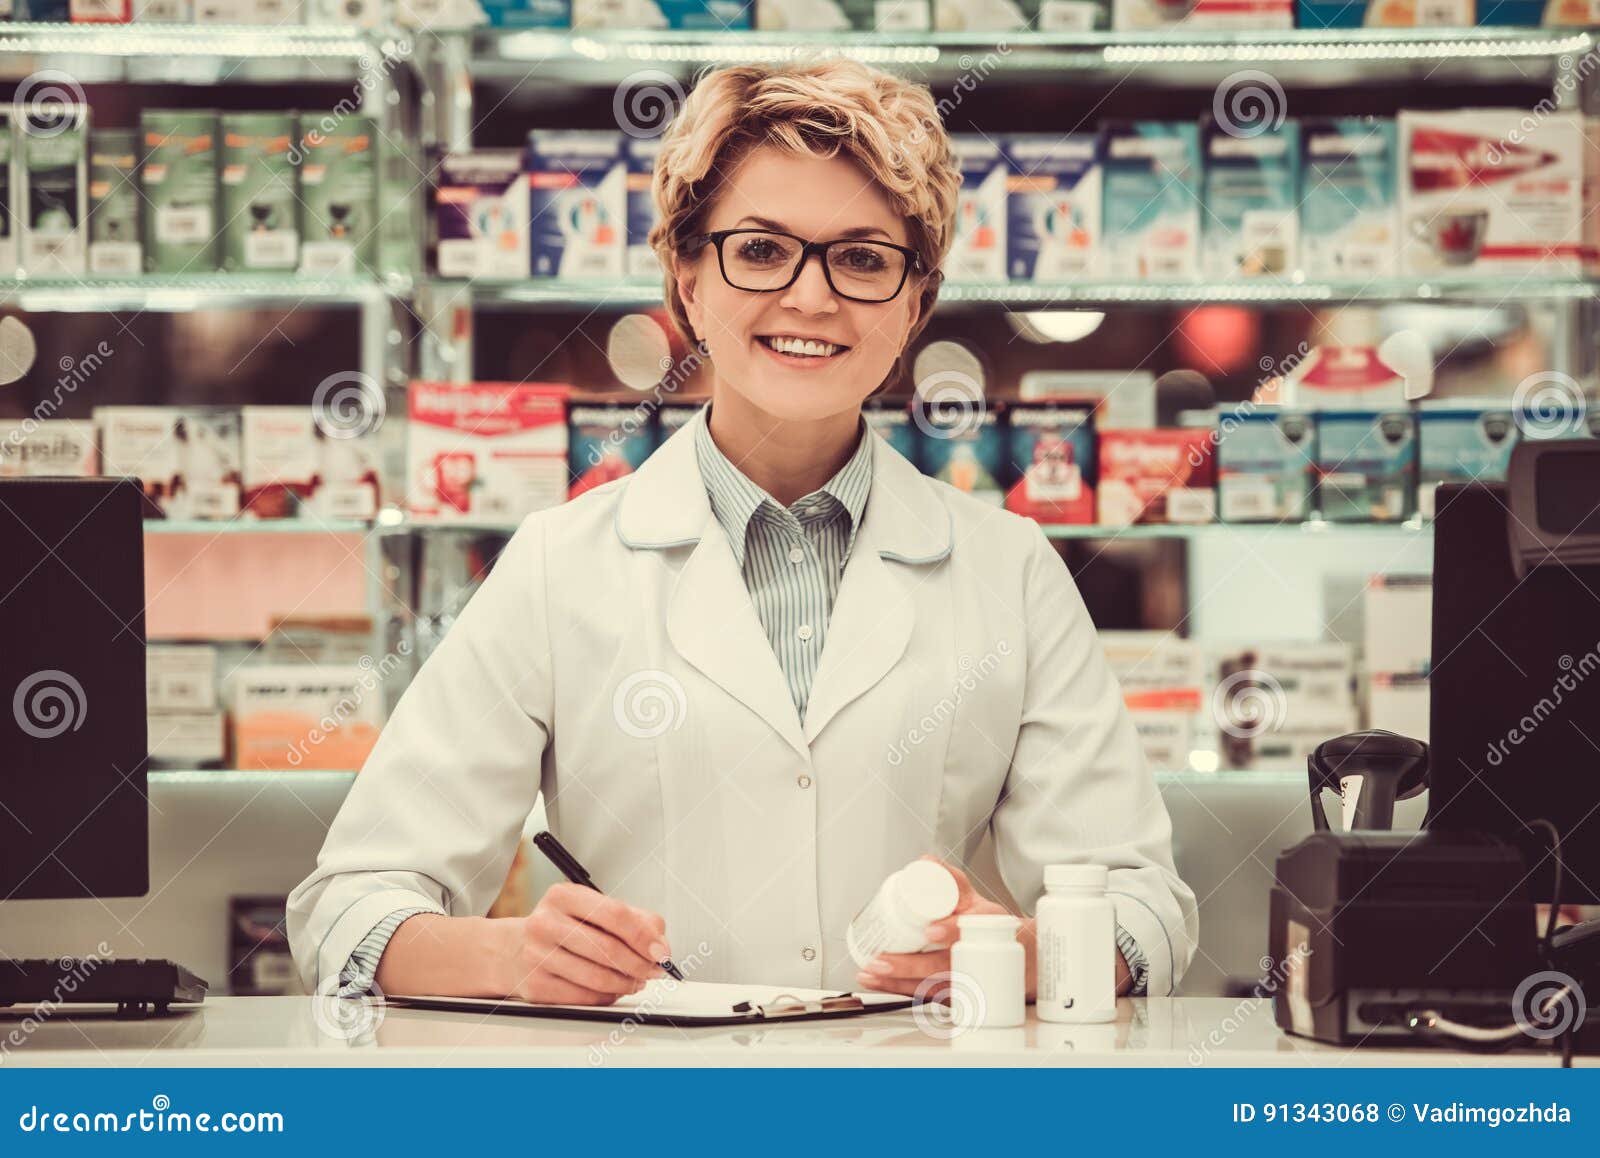 Beautiful Pharmacist at Work Stock Photo - Image of cure, people: 91343068